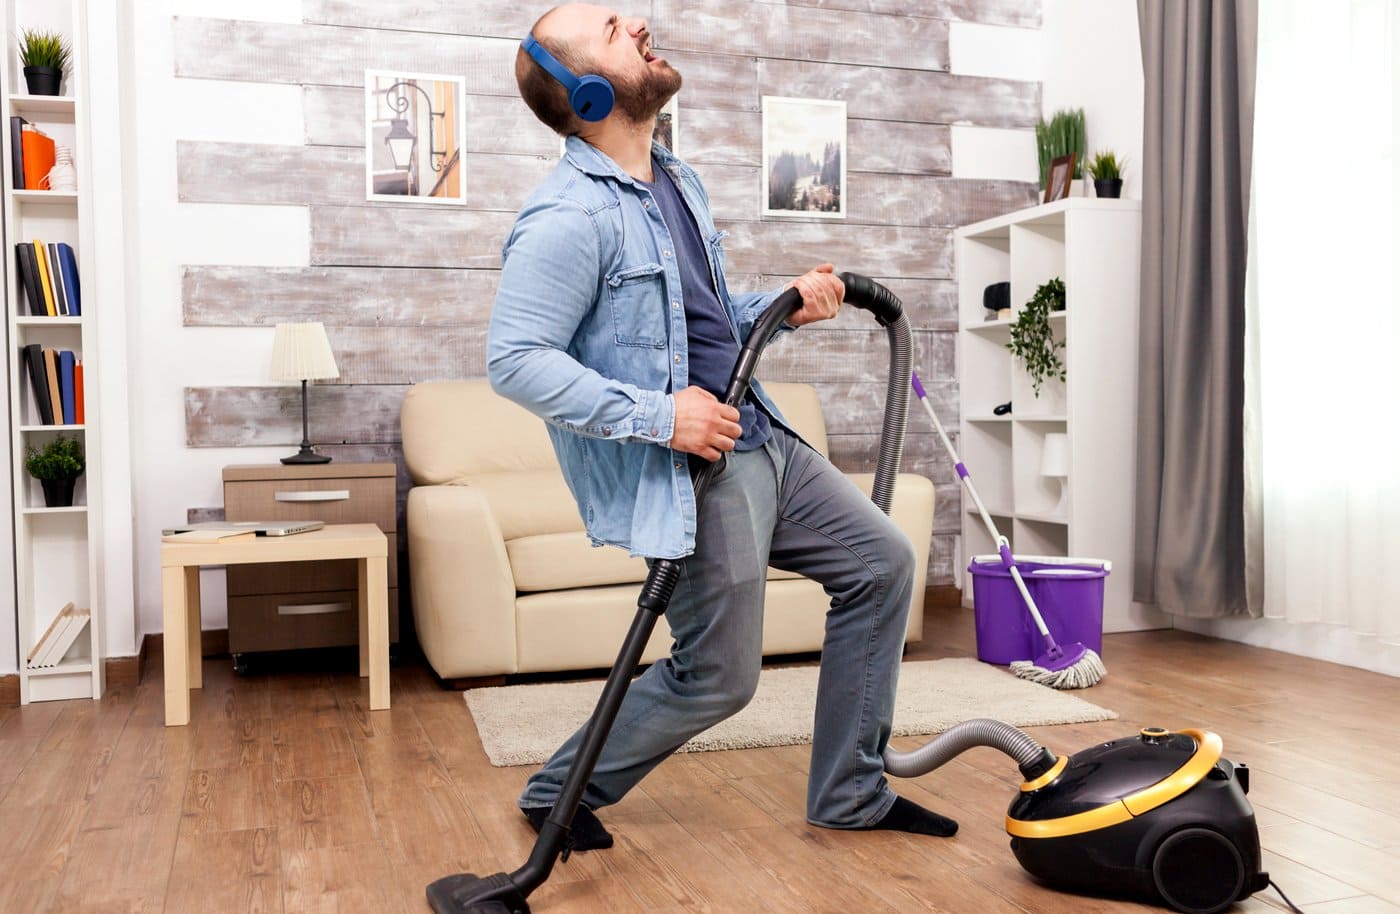 Man rocking out whild doing the vacuuming